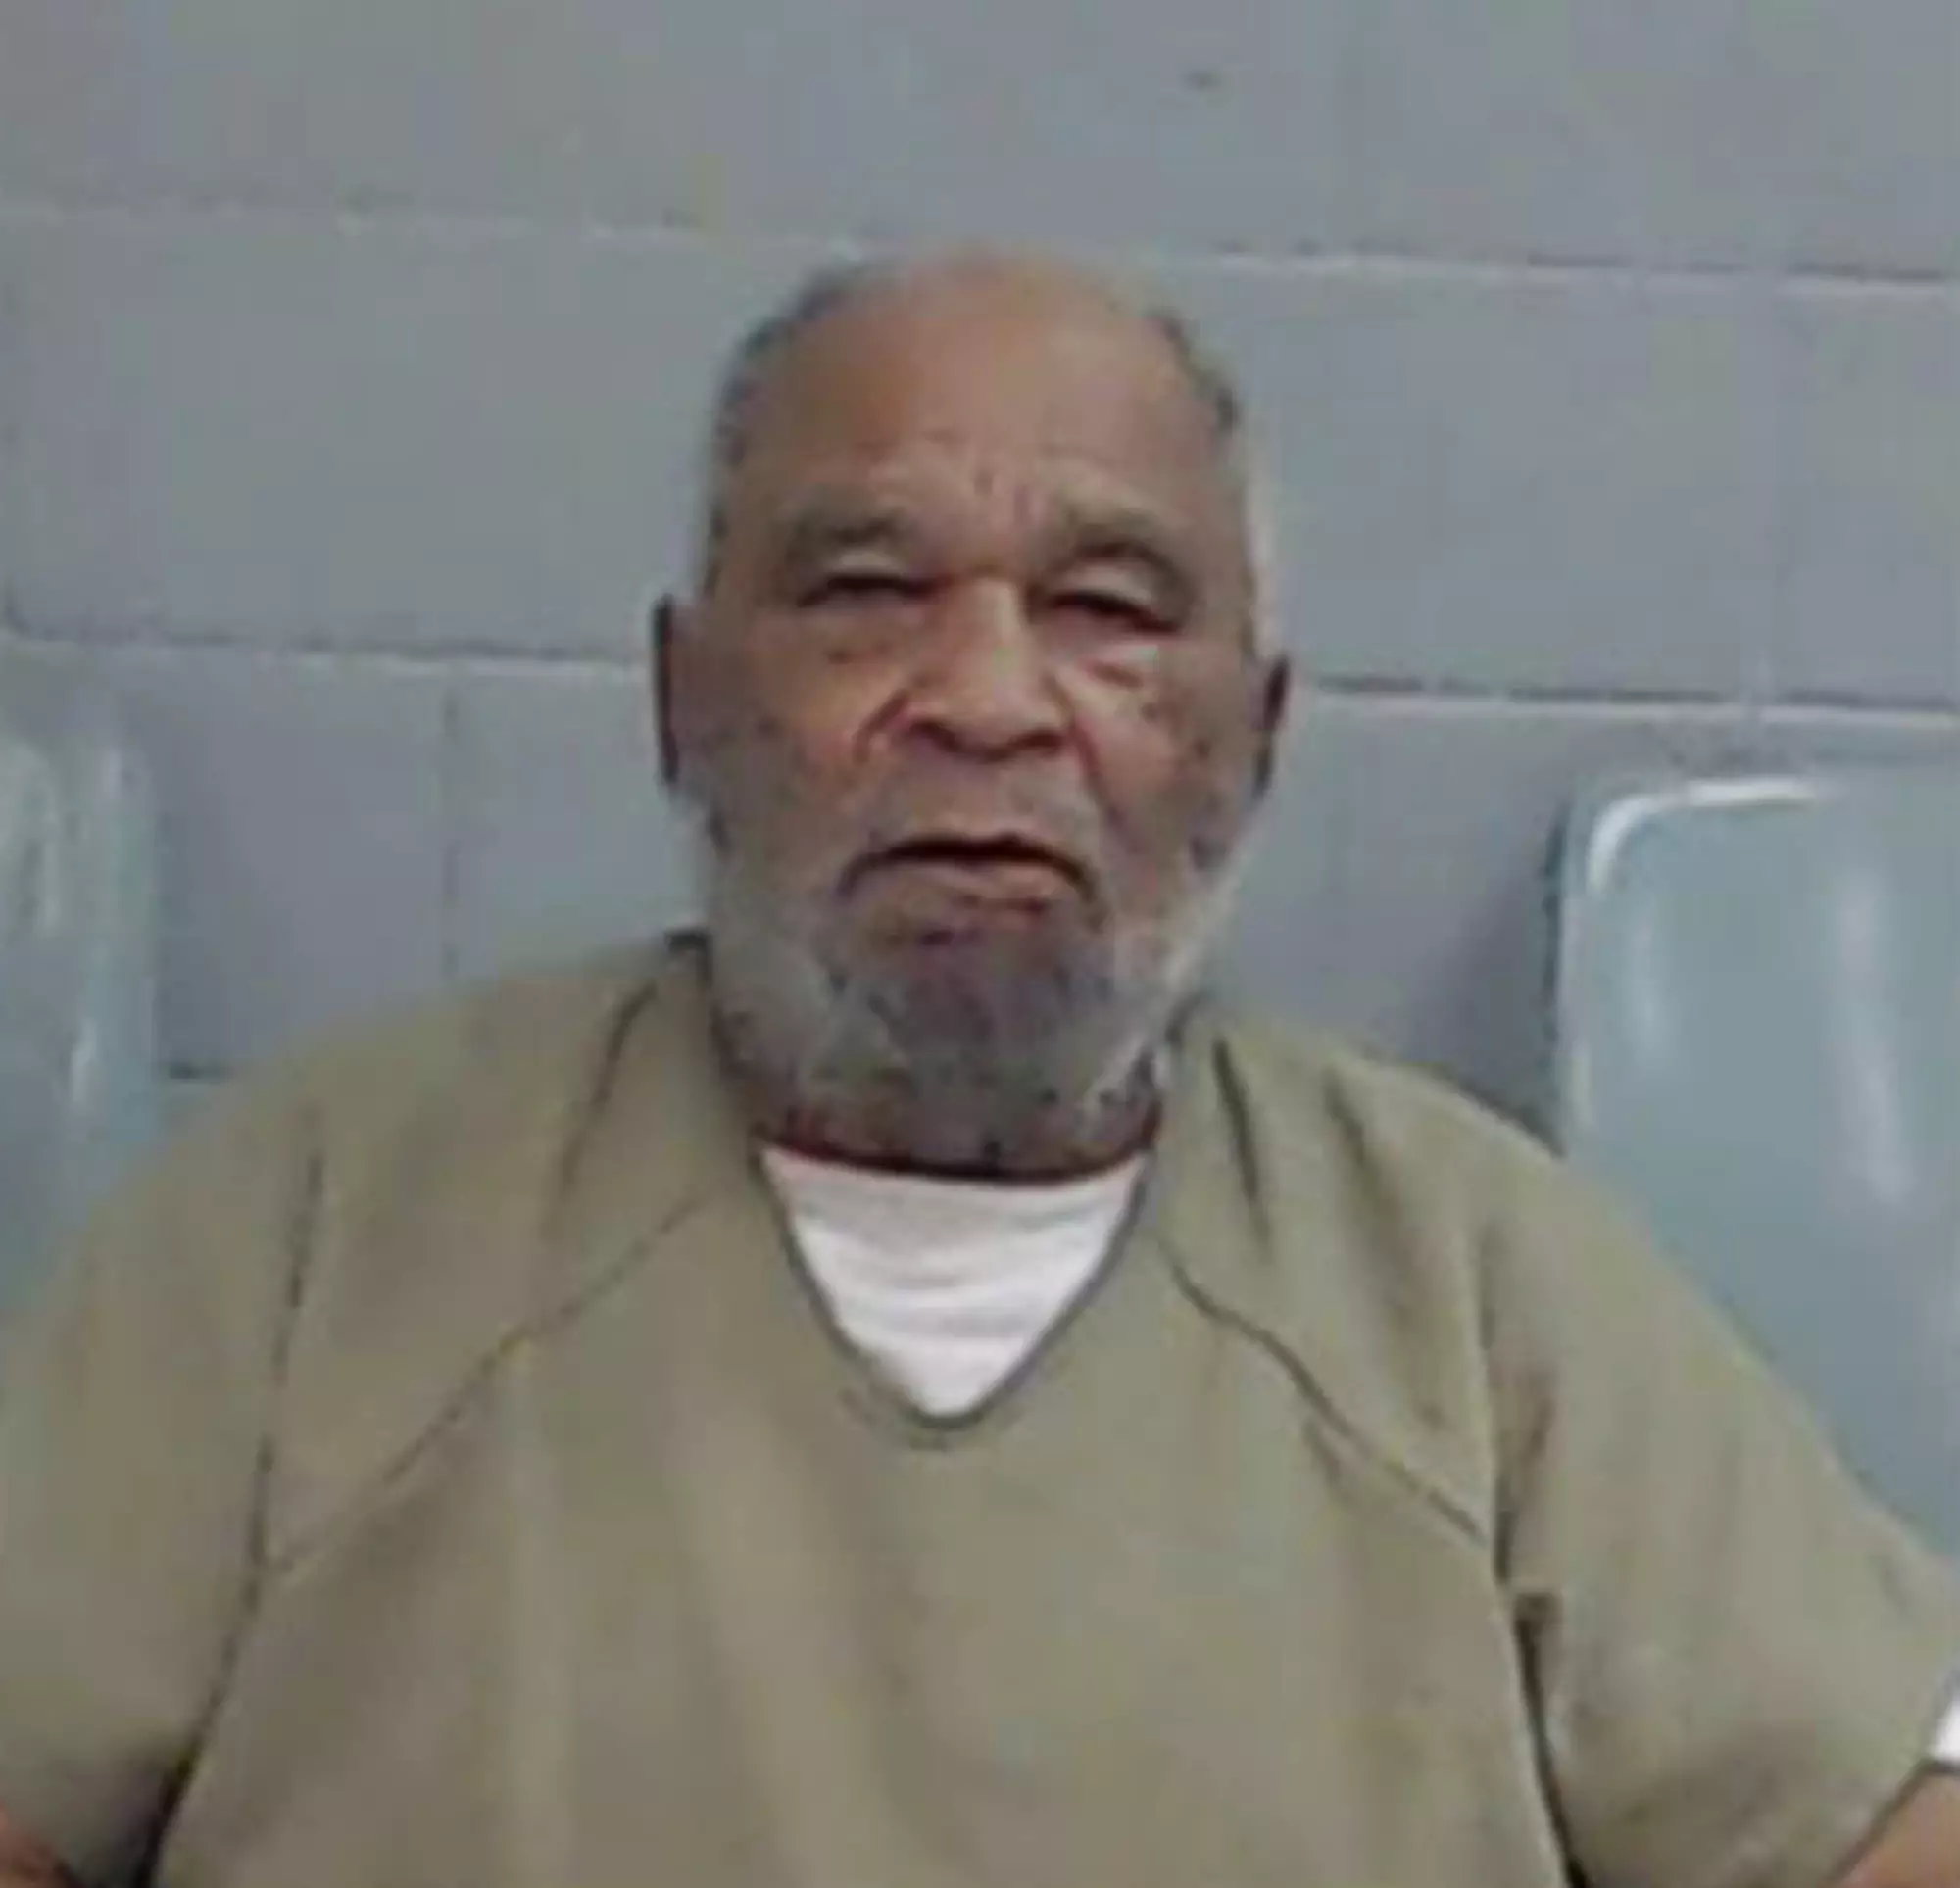 Samuel Little, who has allegedly confessed to 90 murders.